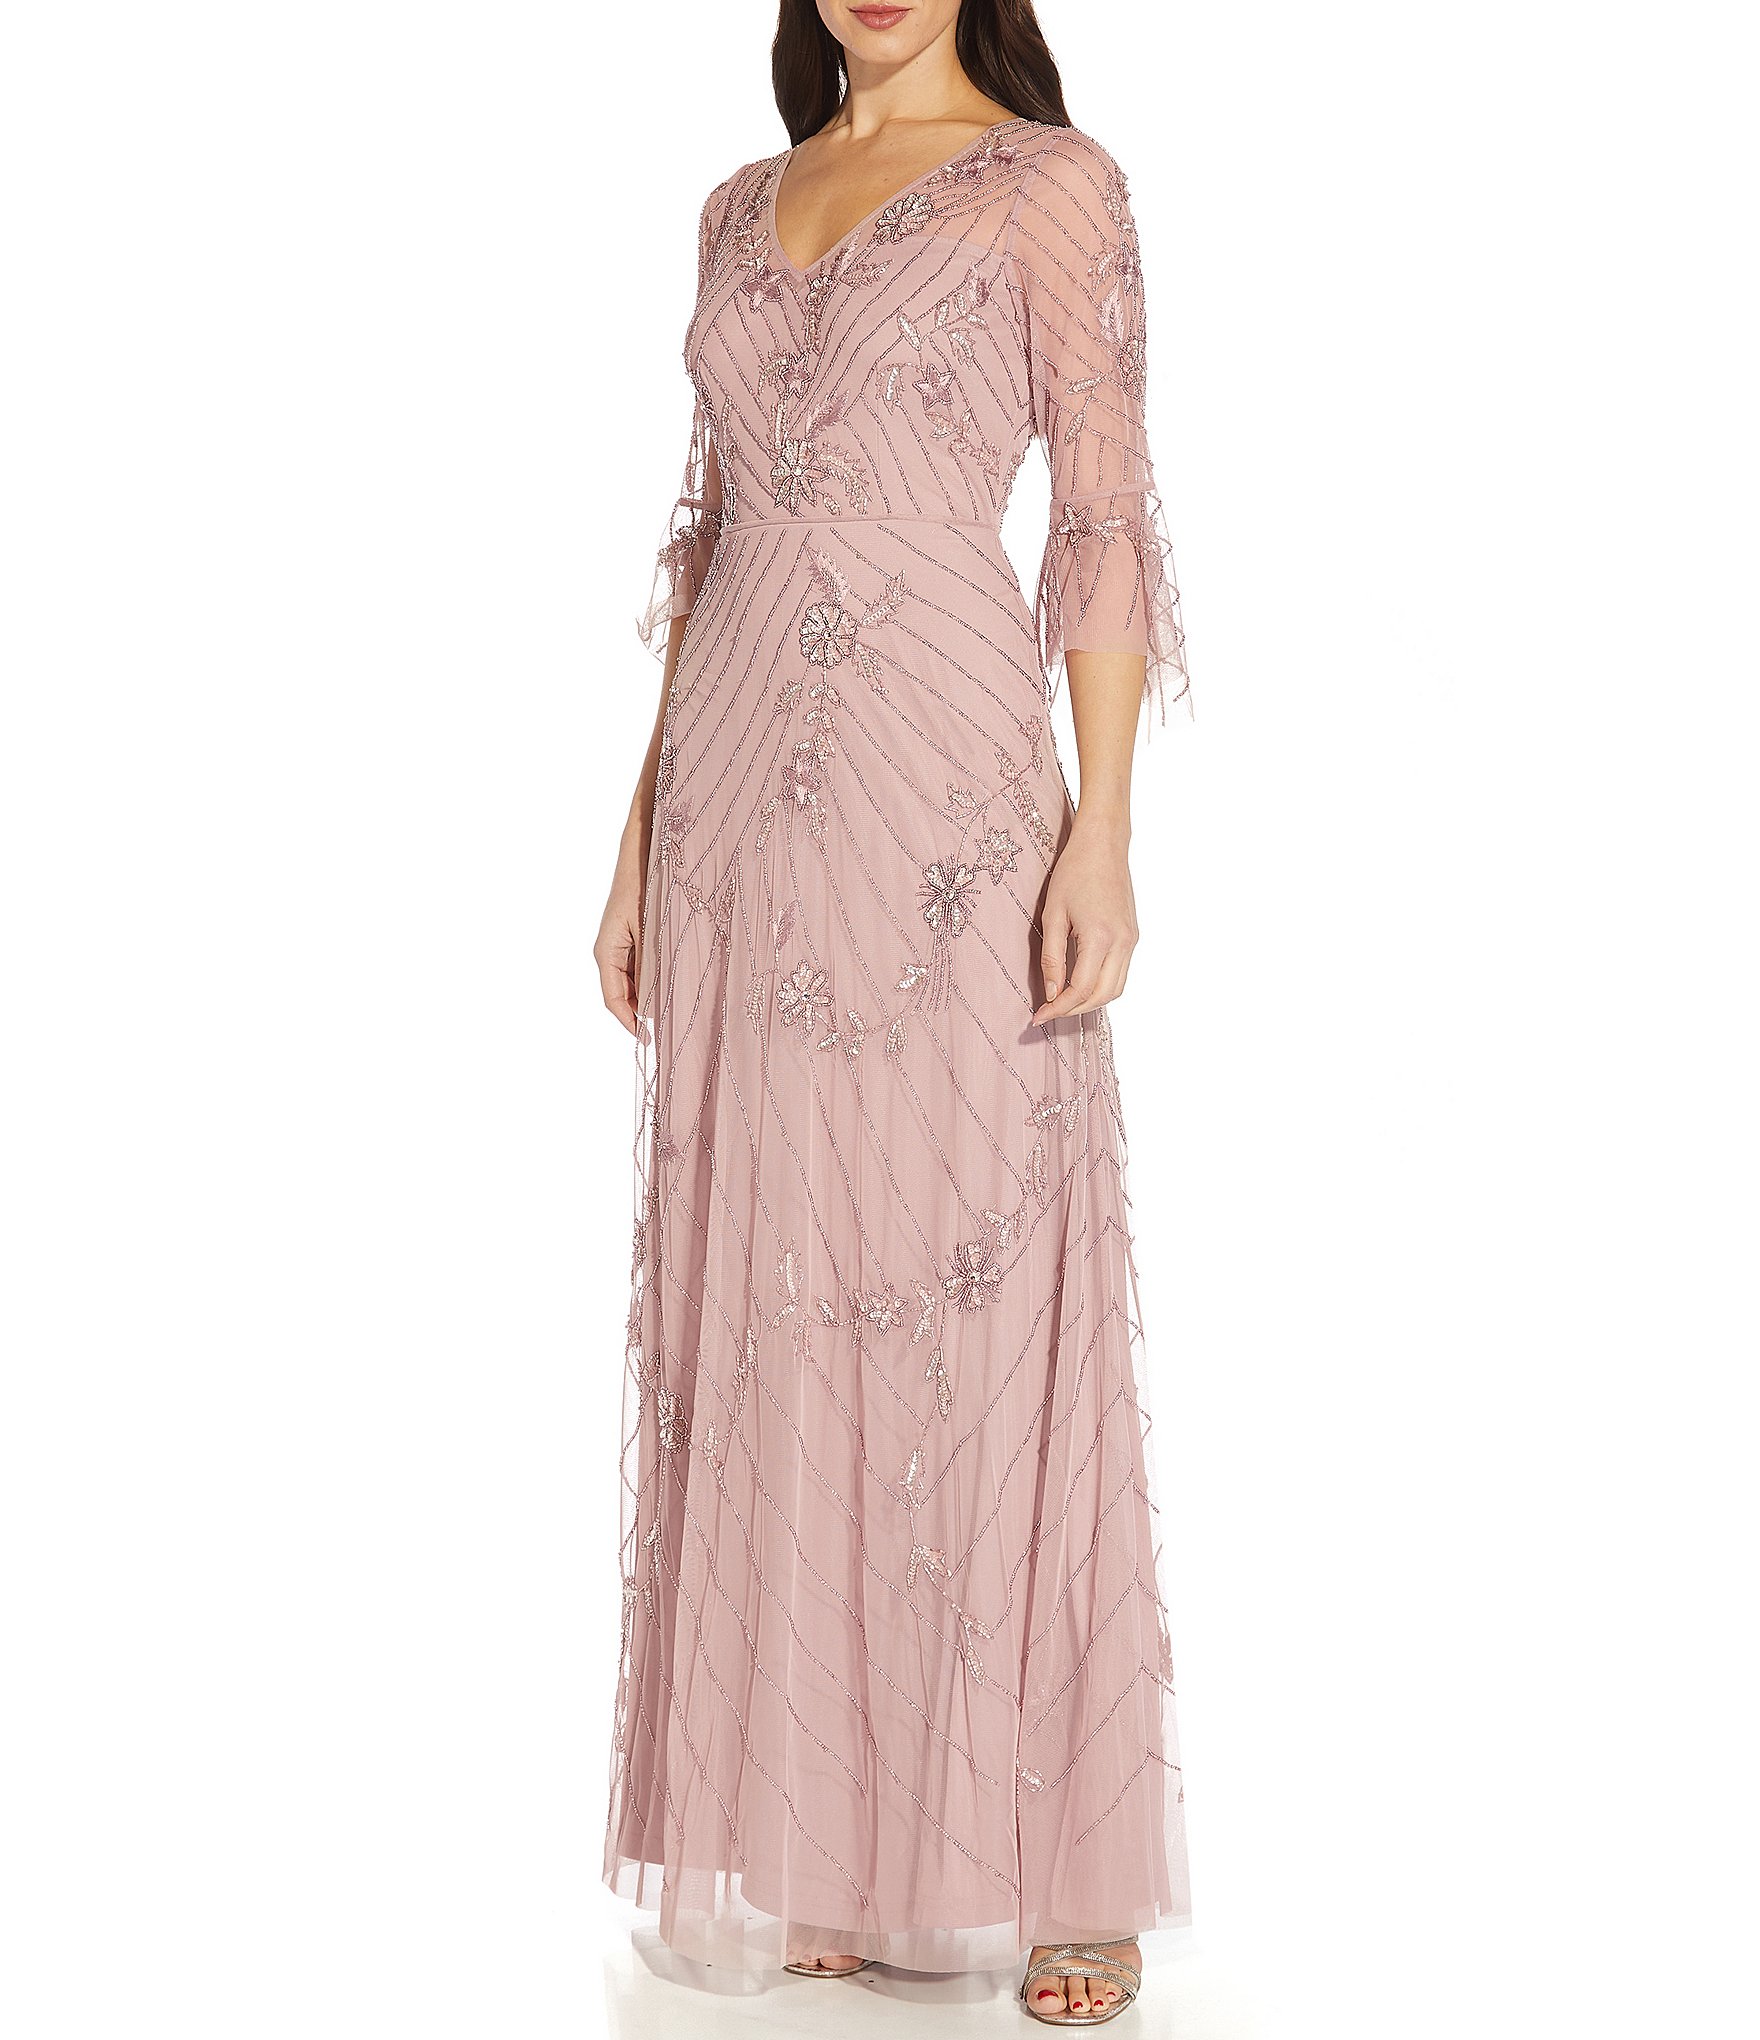 Monumental Mecánico nosotros Adrianna Papell Beaded Bell 3/4 Sleeve V-Neck A-Line Mesh Gown | Dillard's